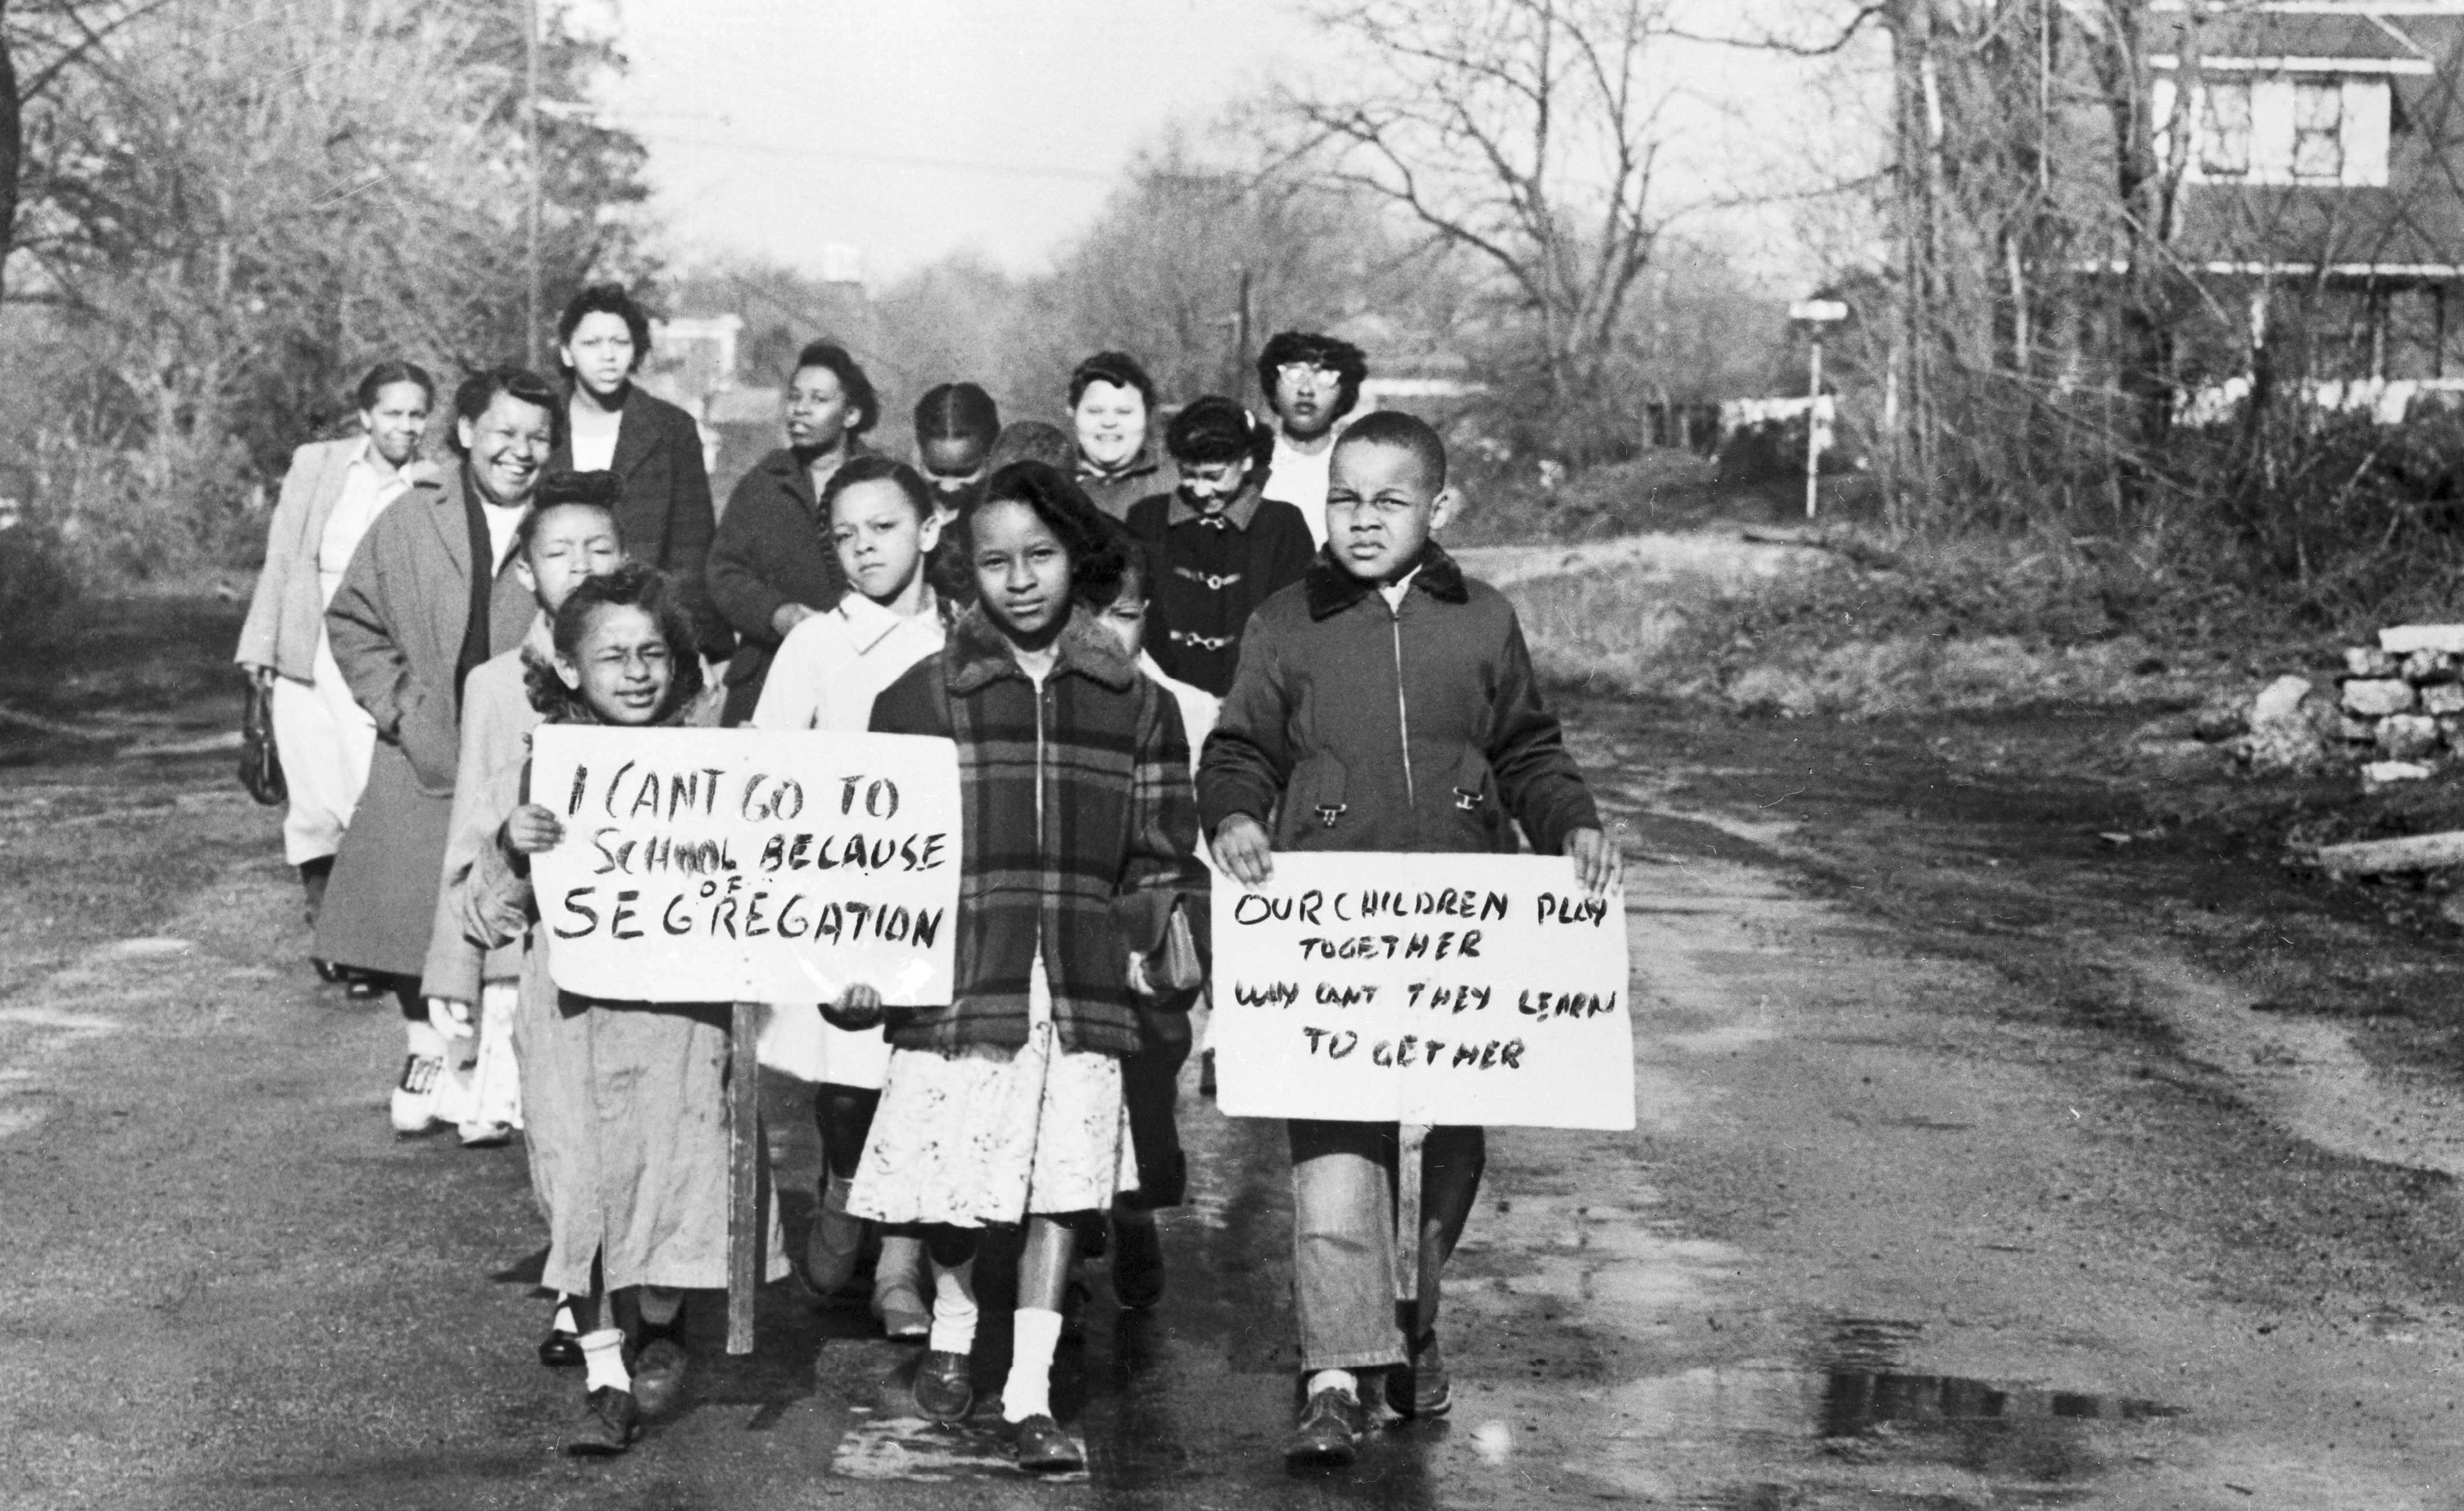 Black and white photograph of a group of African-American Children standing in a group protesting segregation.  Two of them are holding signs  "I Can't Go To Shcool Because of Segregation" and "Our Children Play Together Why Can't they Learn Together"